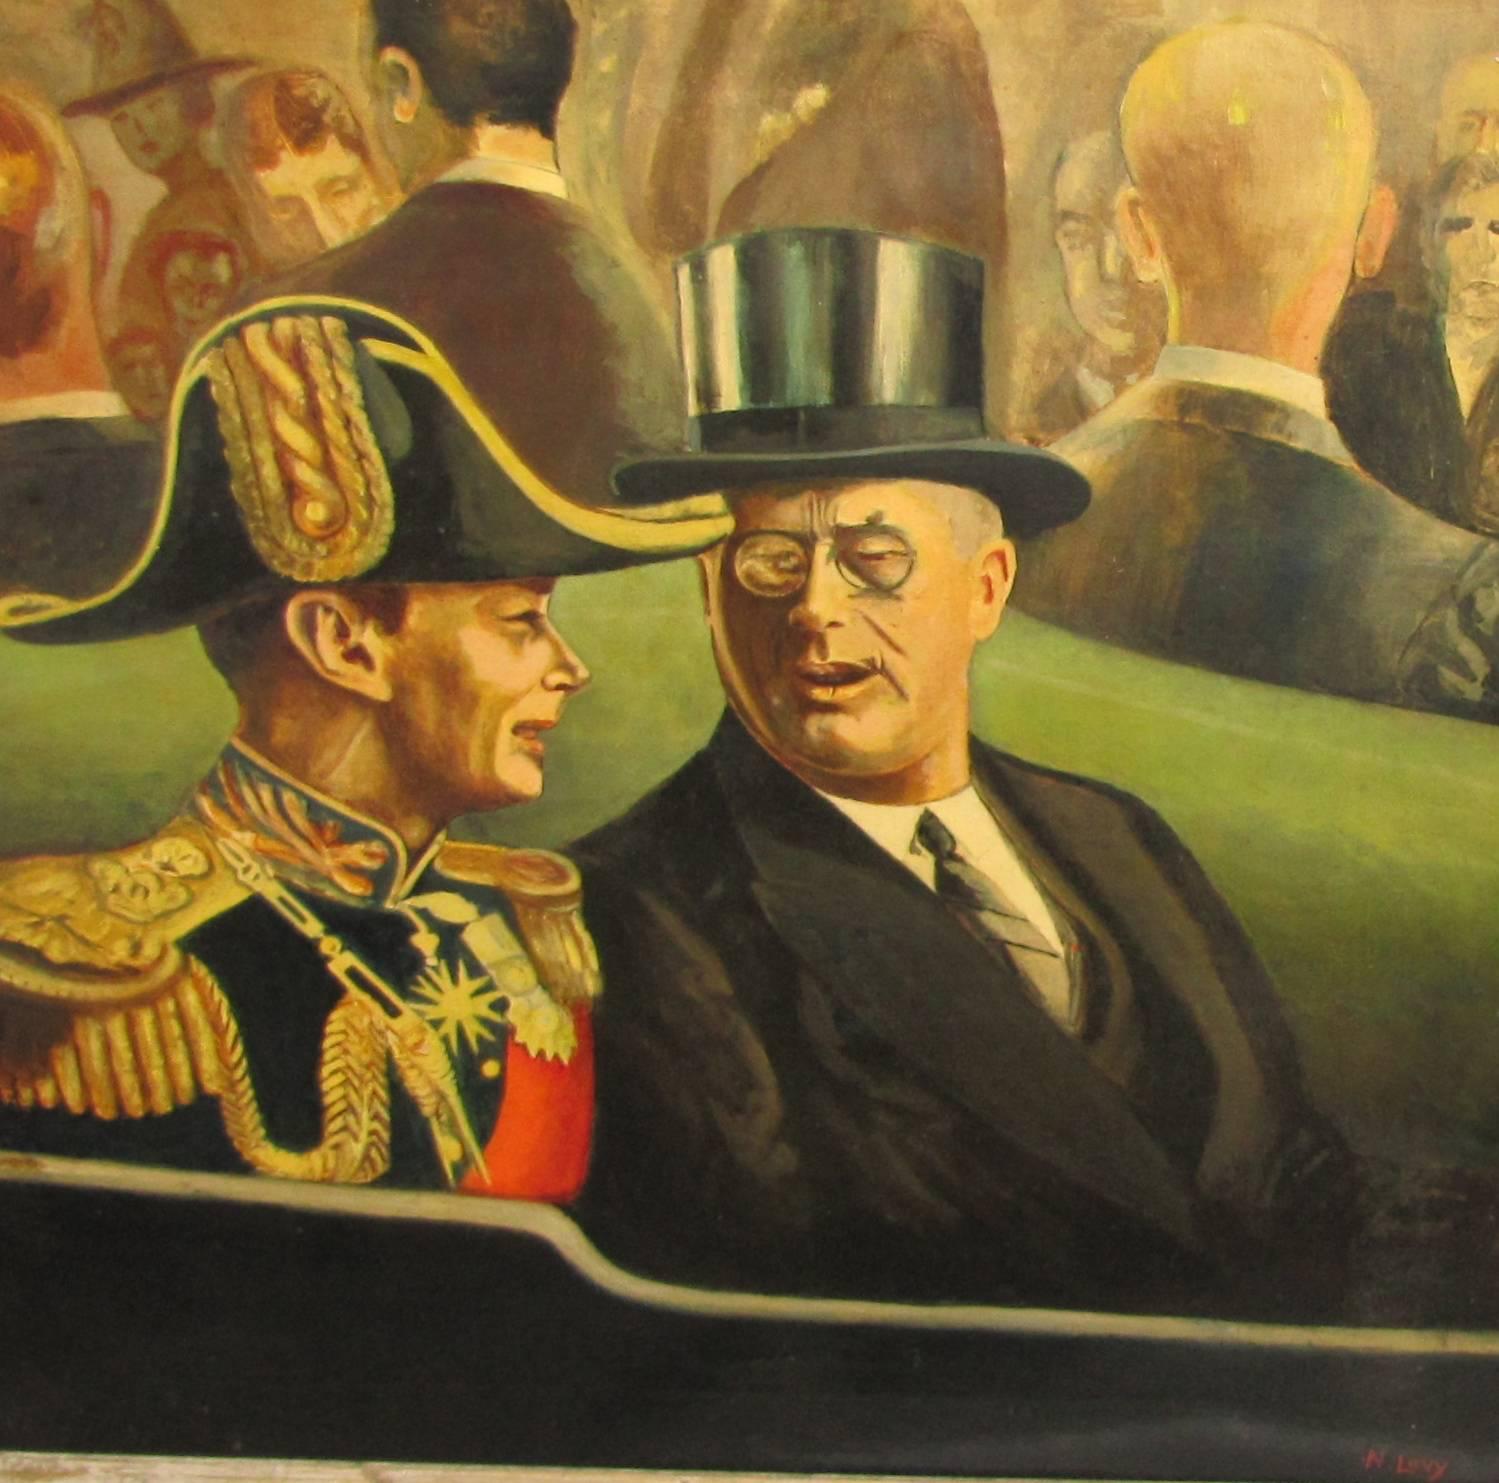 A original 1939 oil painting of President Franklin D. Roosevelt and King George VI signed by N. Levy a listed artist N. (Nat) Levy.
 A characterization oil painting of the two famous subjects produced for a poster. The original poster is at The FDR